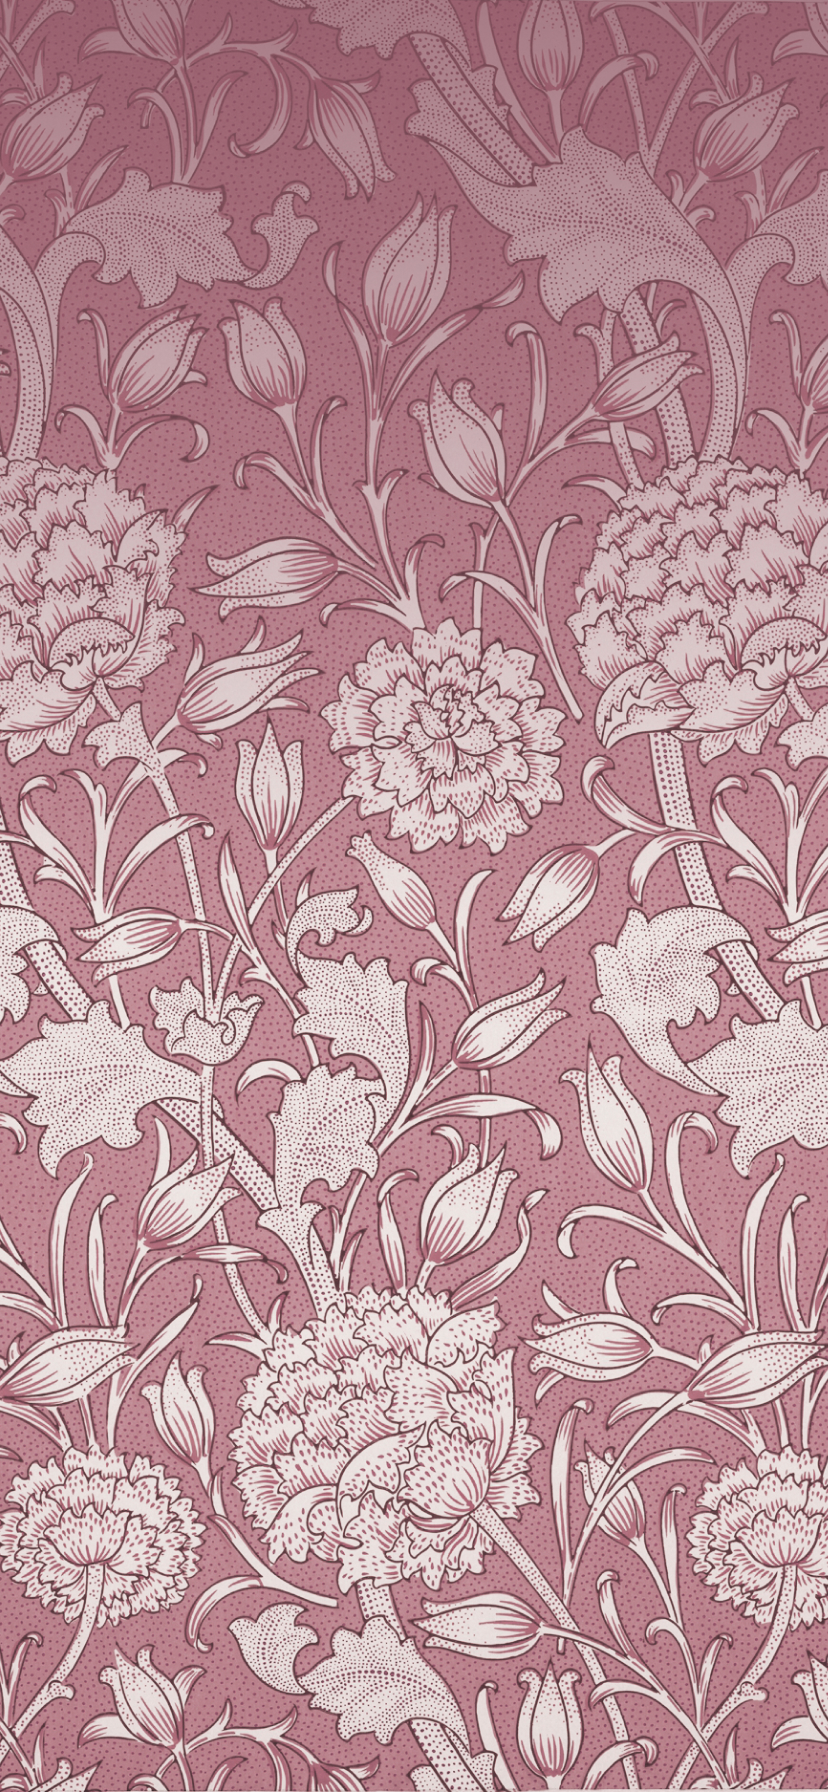 Wild Tulip Pink by William Morris Vintage Floral Wallpaper | Wallaland